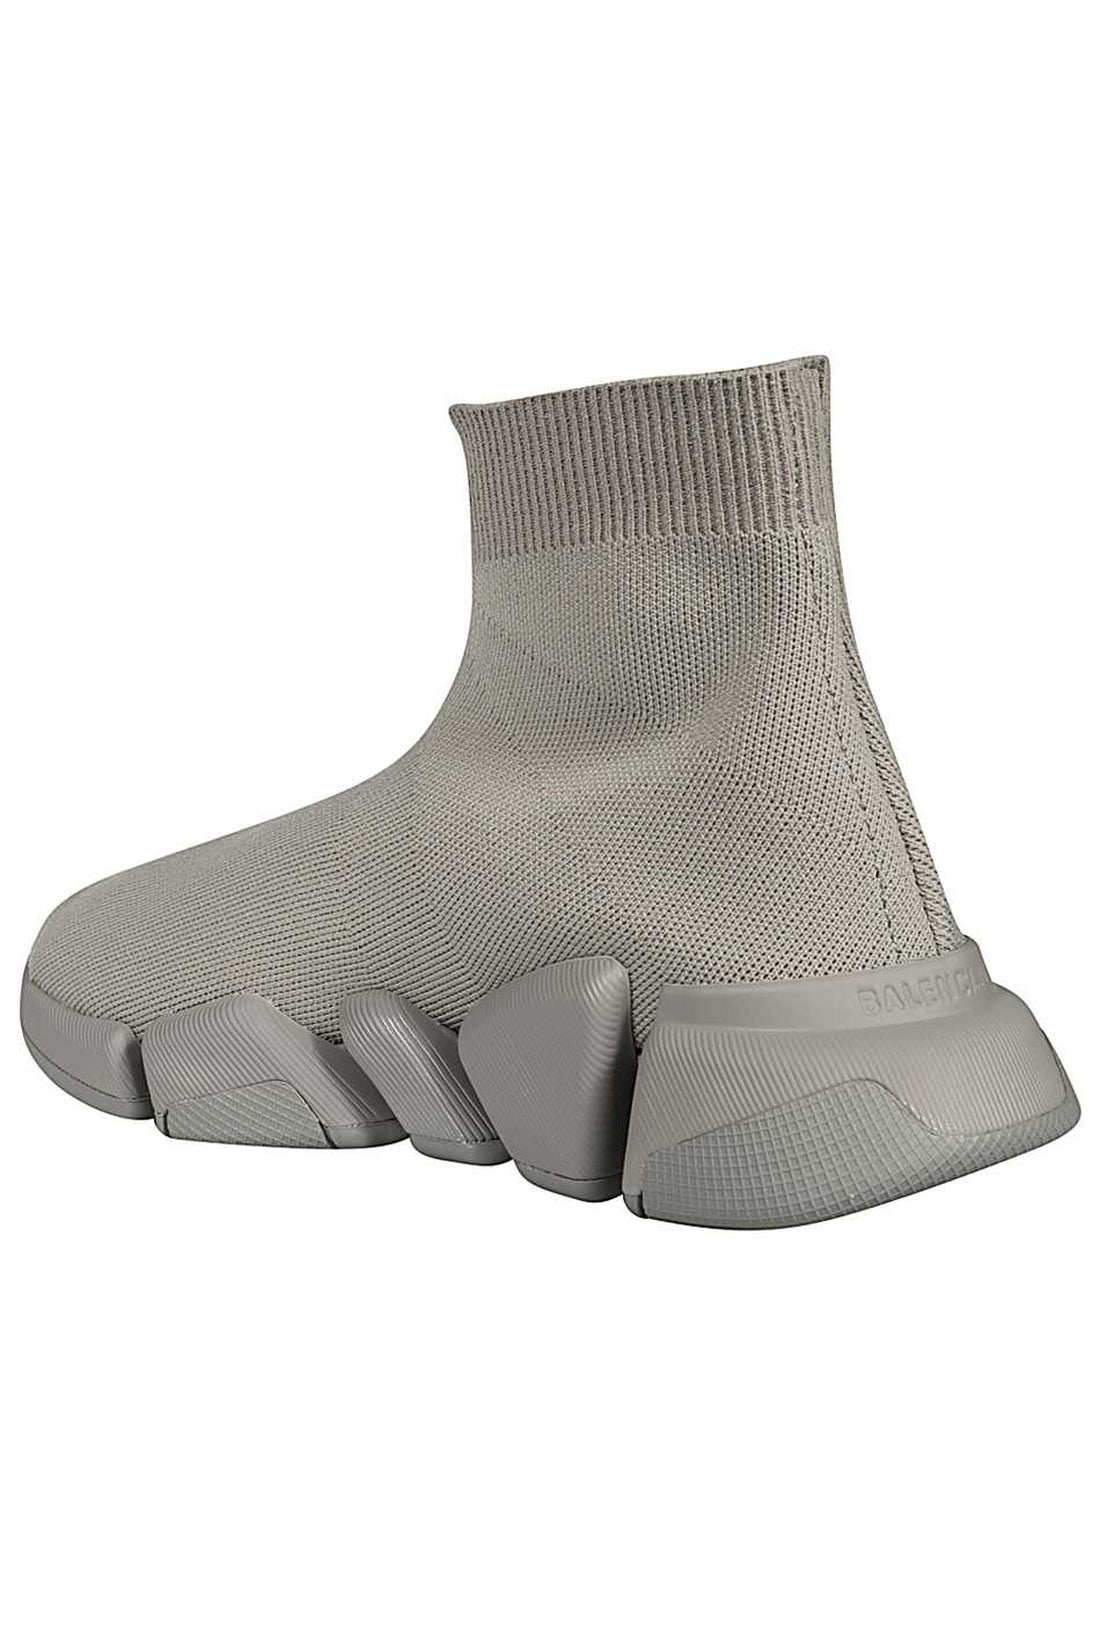 Balenciaga-OUTLET-SALE-Speed 2.0 knitted sock-sneakers-ARCHIVIST